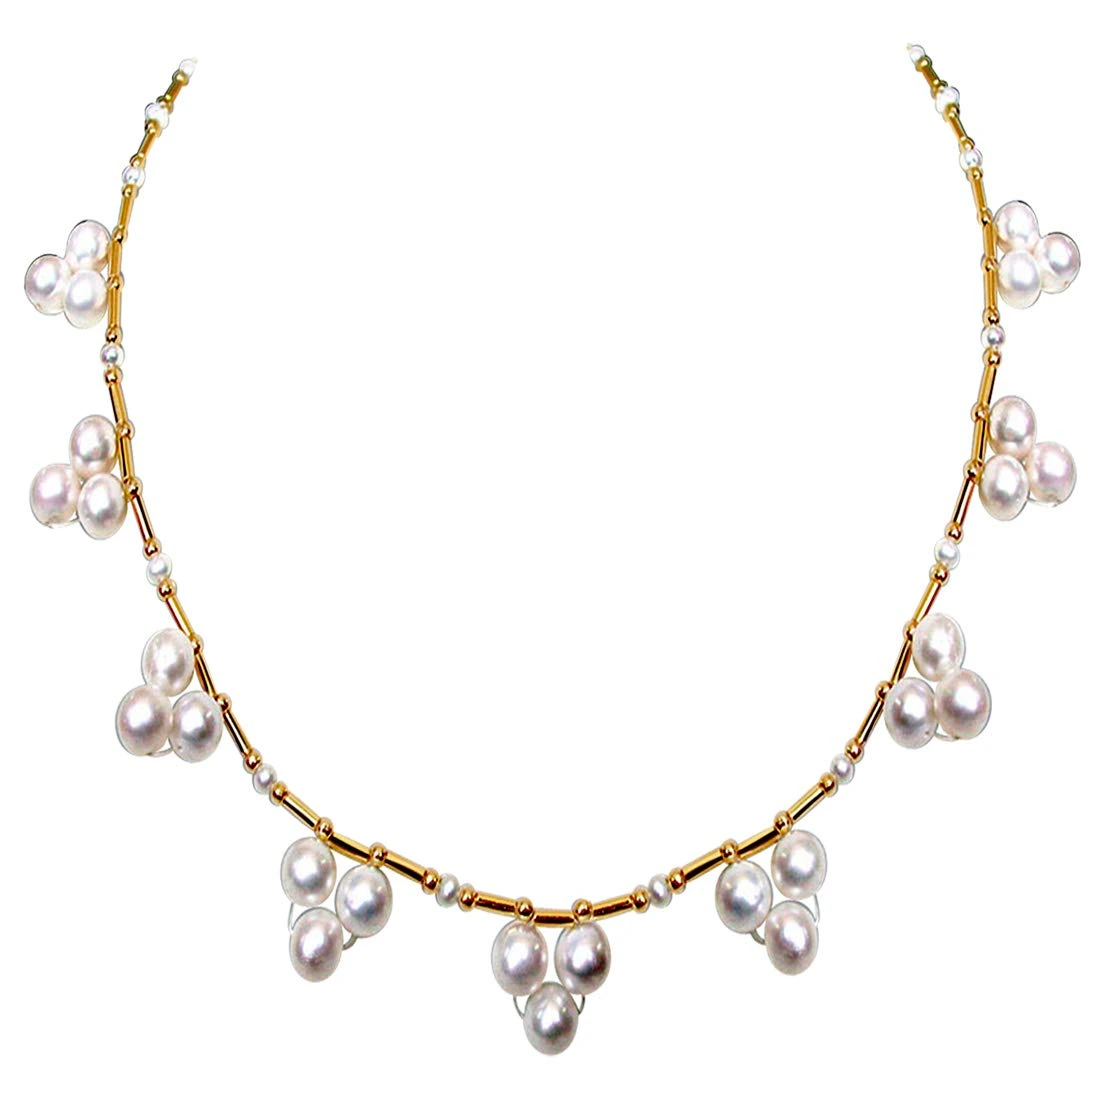 Angelic Beauty - Single Line Flower Design Real Freshwater Pearl Necklace for Women (SN143)